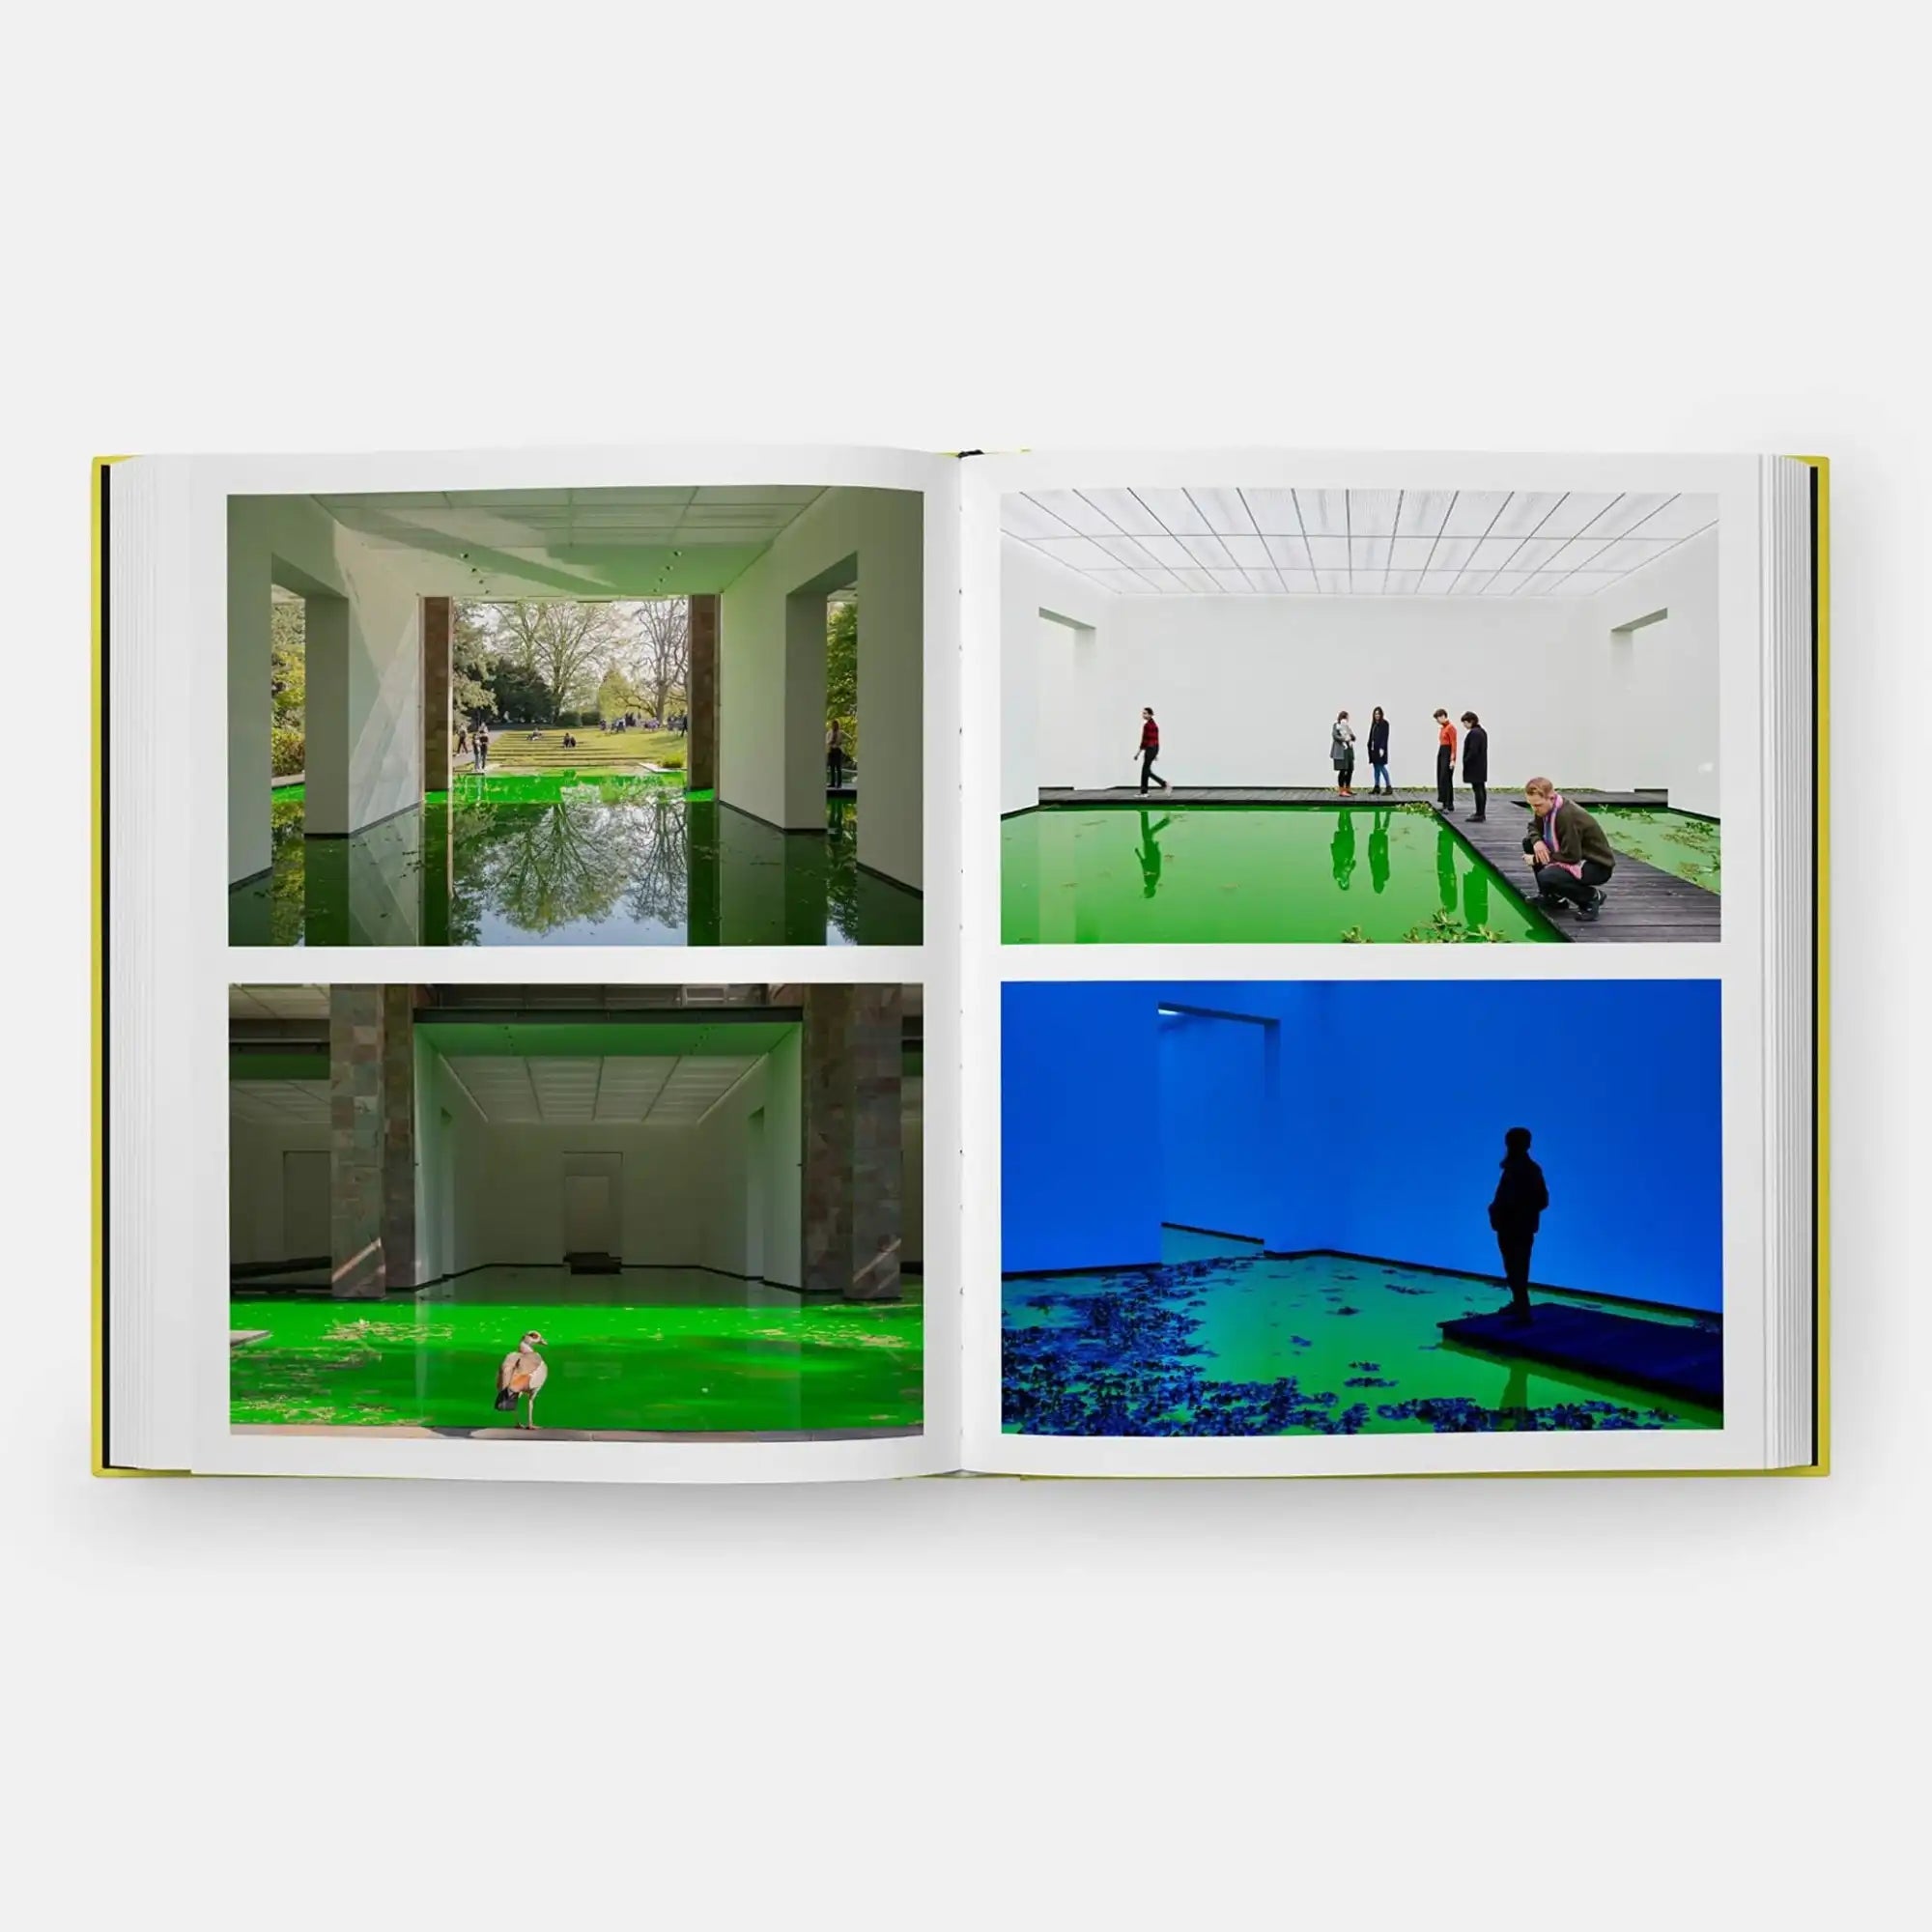 Olafur Eliasson, Experience - THAT COOL LIVING